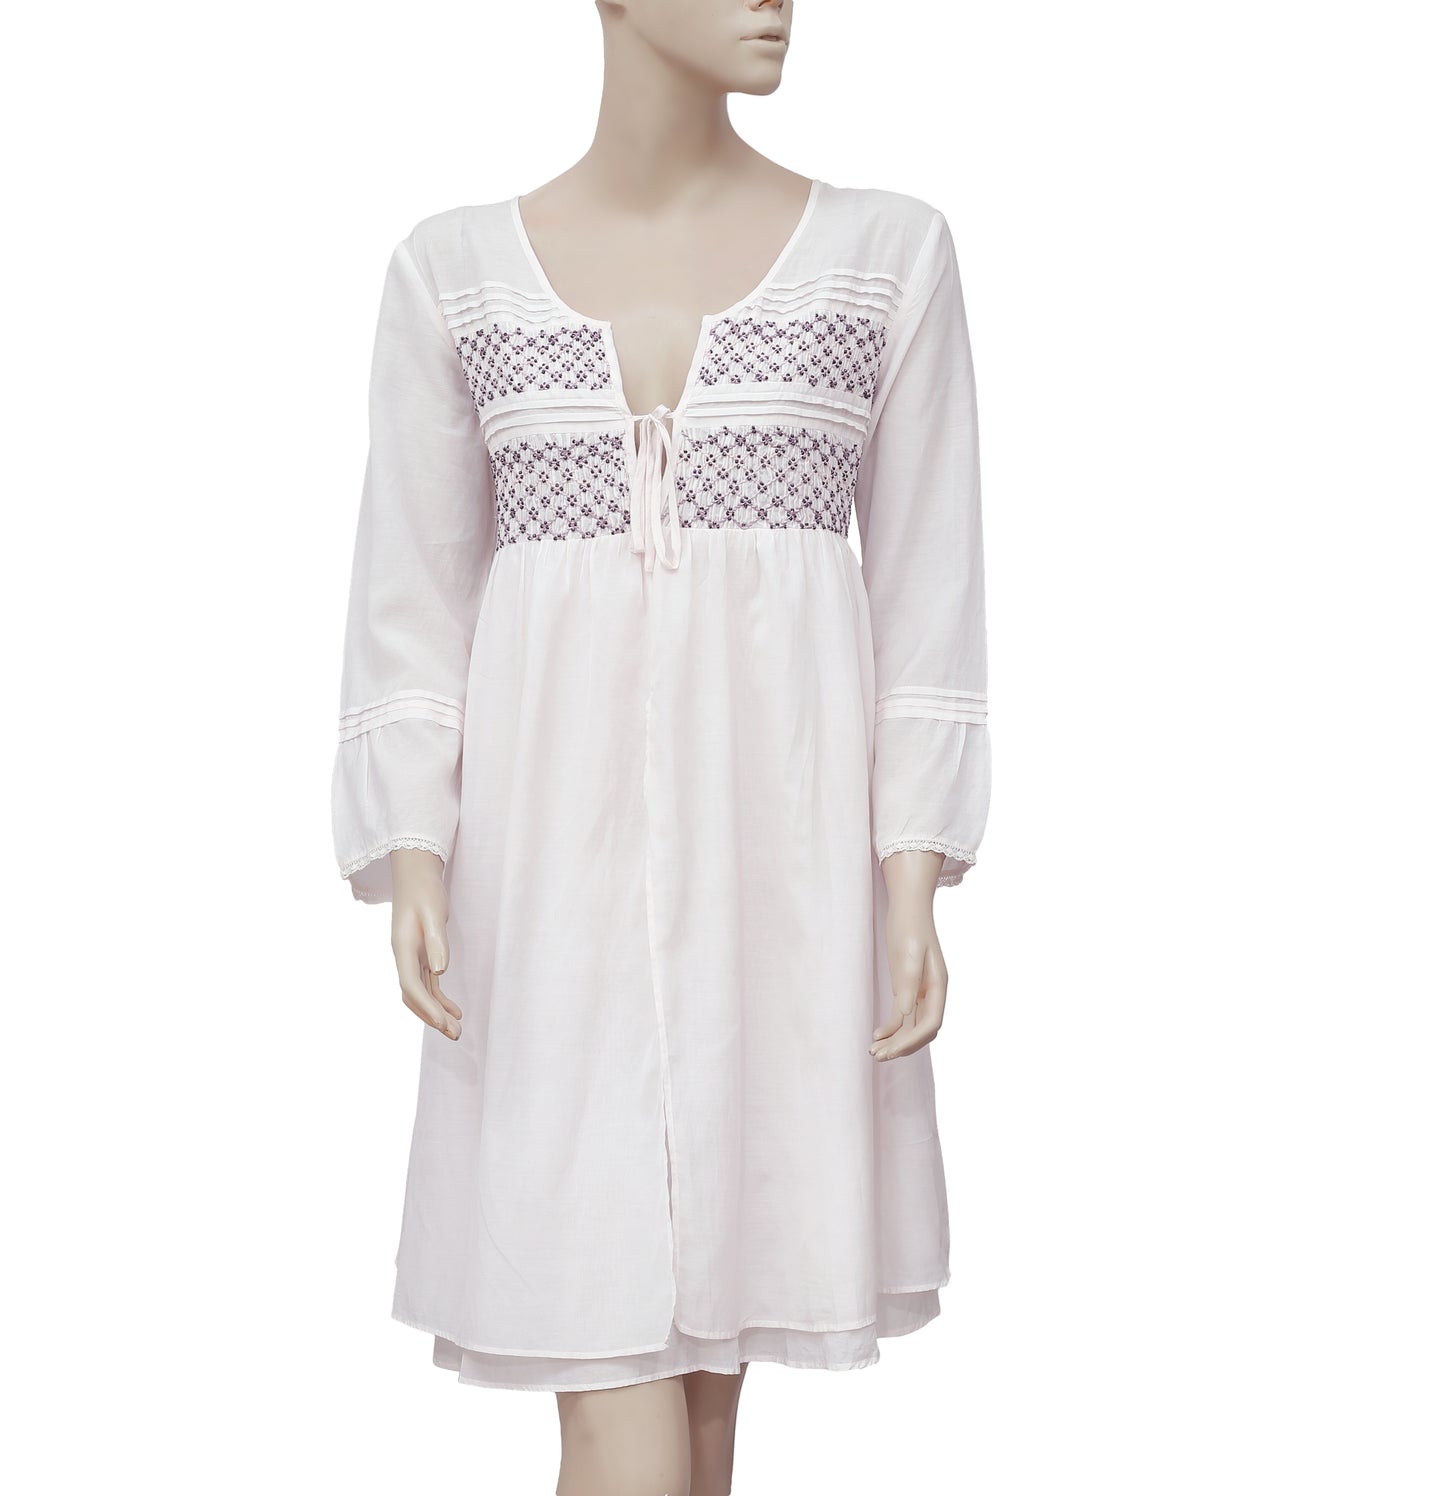 Odd Molly Remix Embroidered Embellished Lace Tunic Dress L